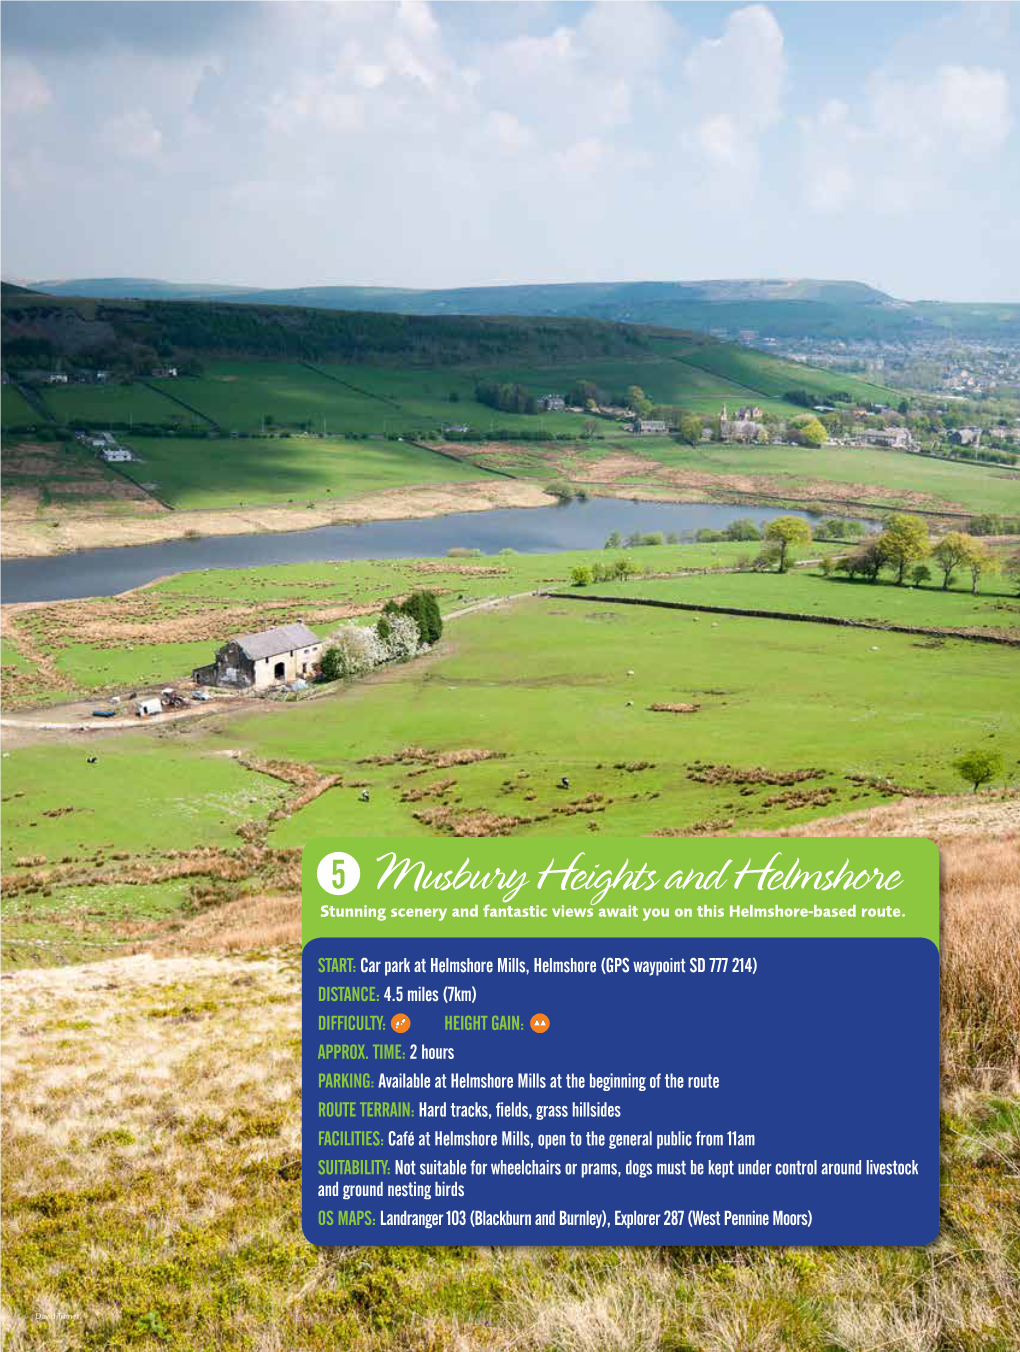 Musbury Heights and Helmshore Stunning Scenery and Fantastic Views Await You on This Helmshore-Based Route